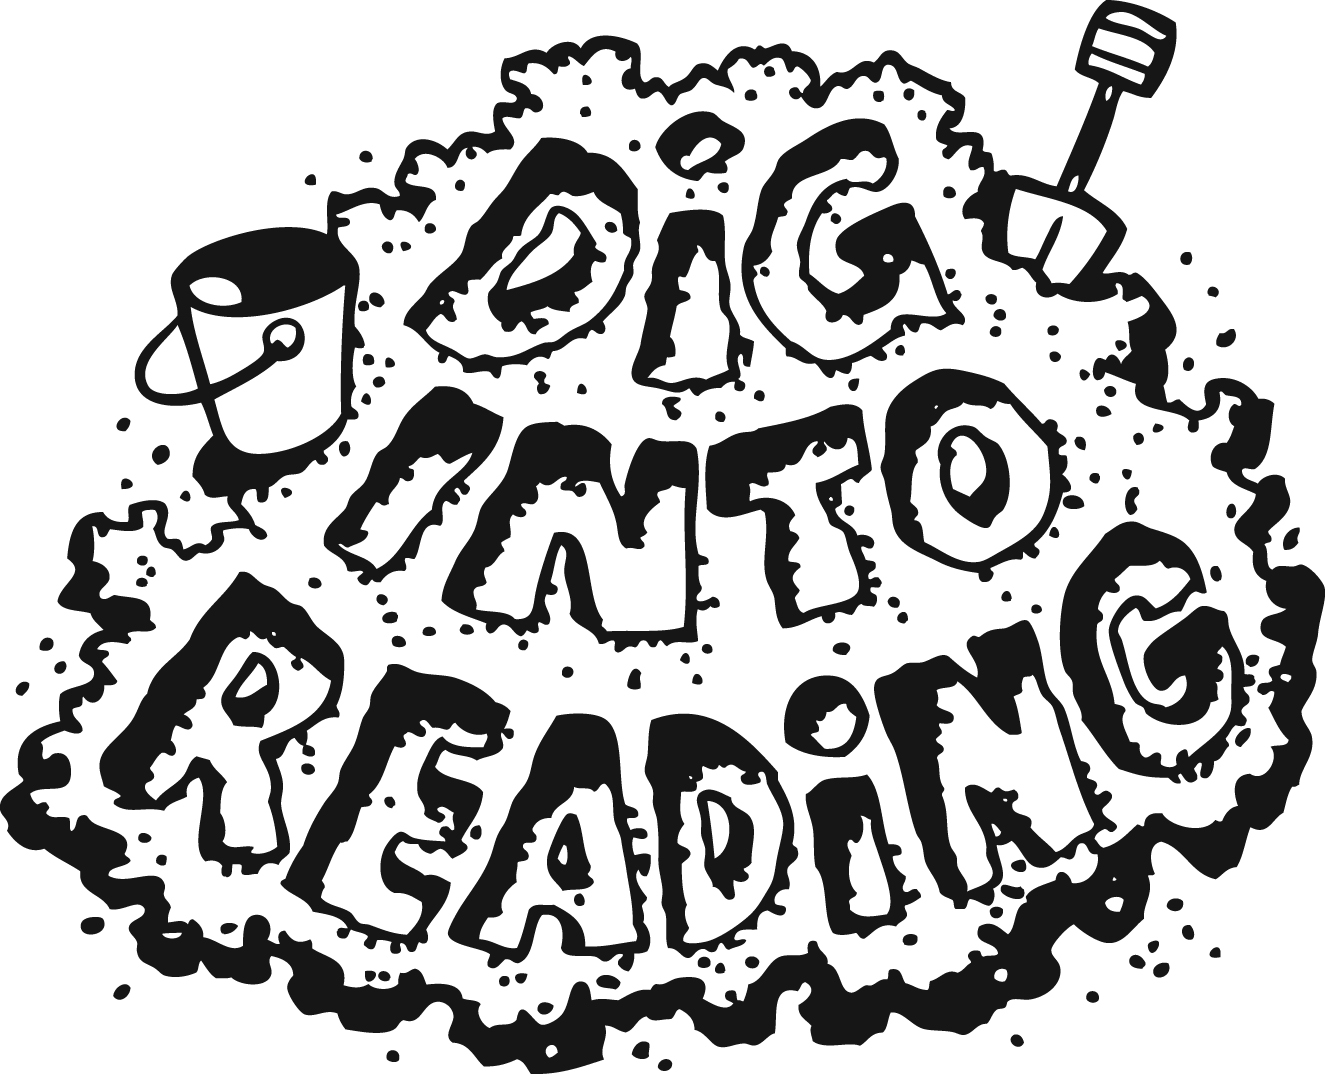 Reading Log Coloring Sheet coloring page, coloring image, clipart 